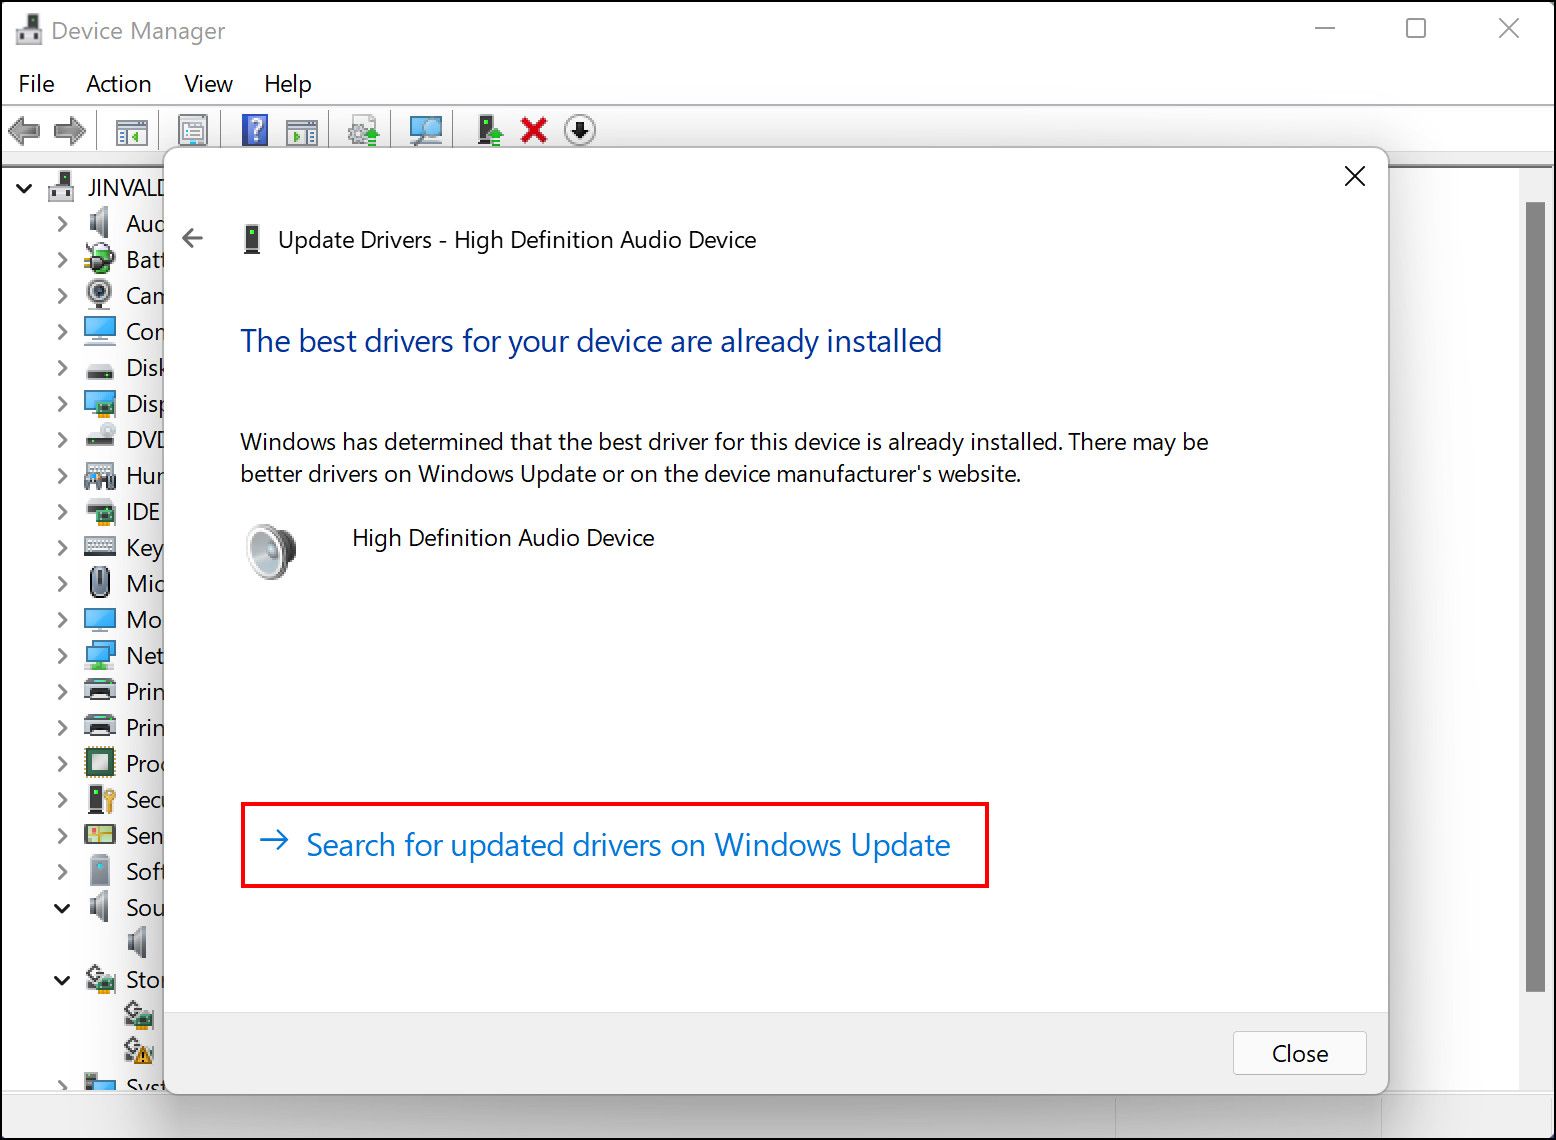 Search for drivers on Windows update